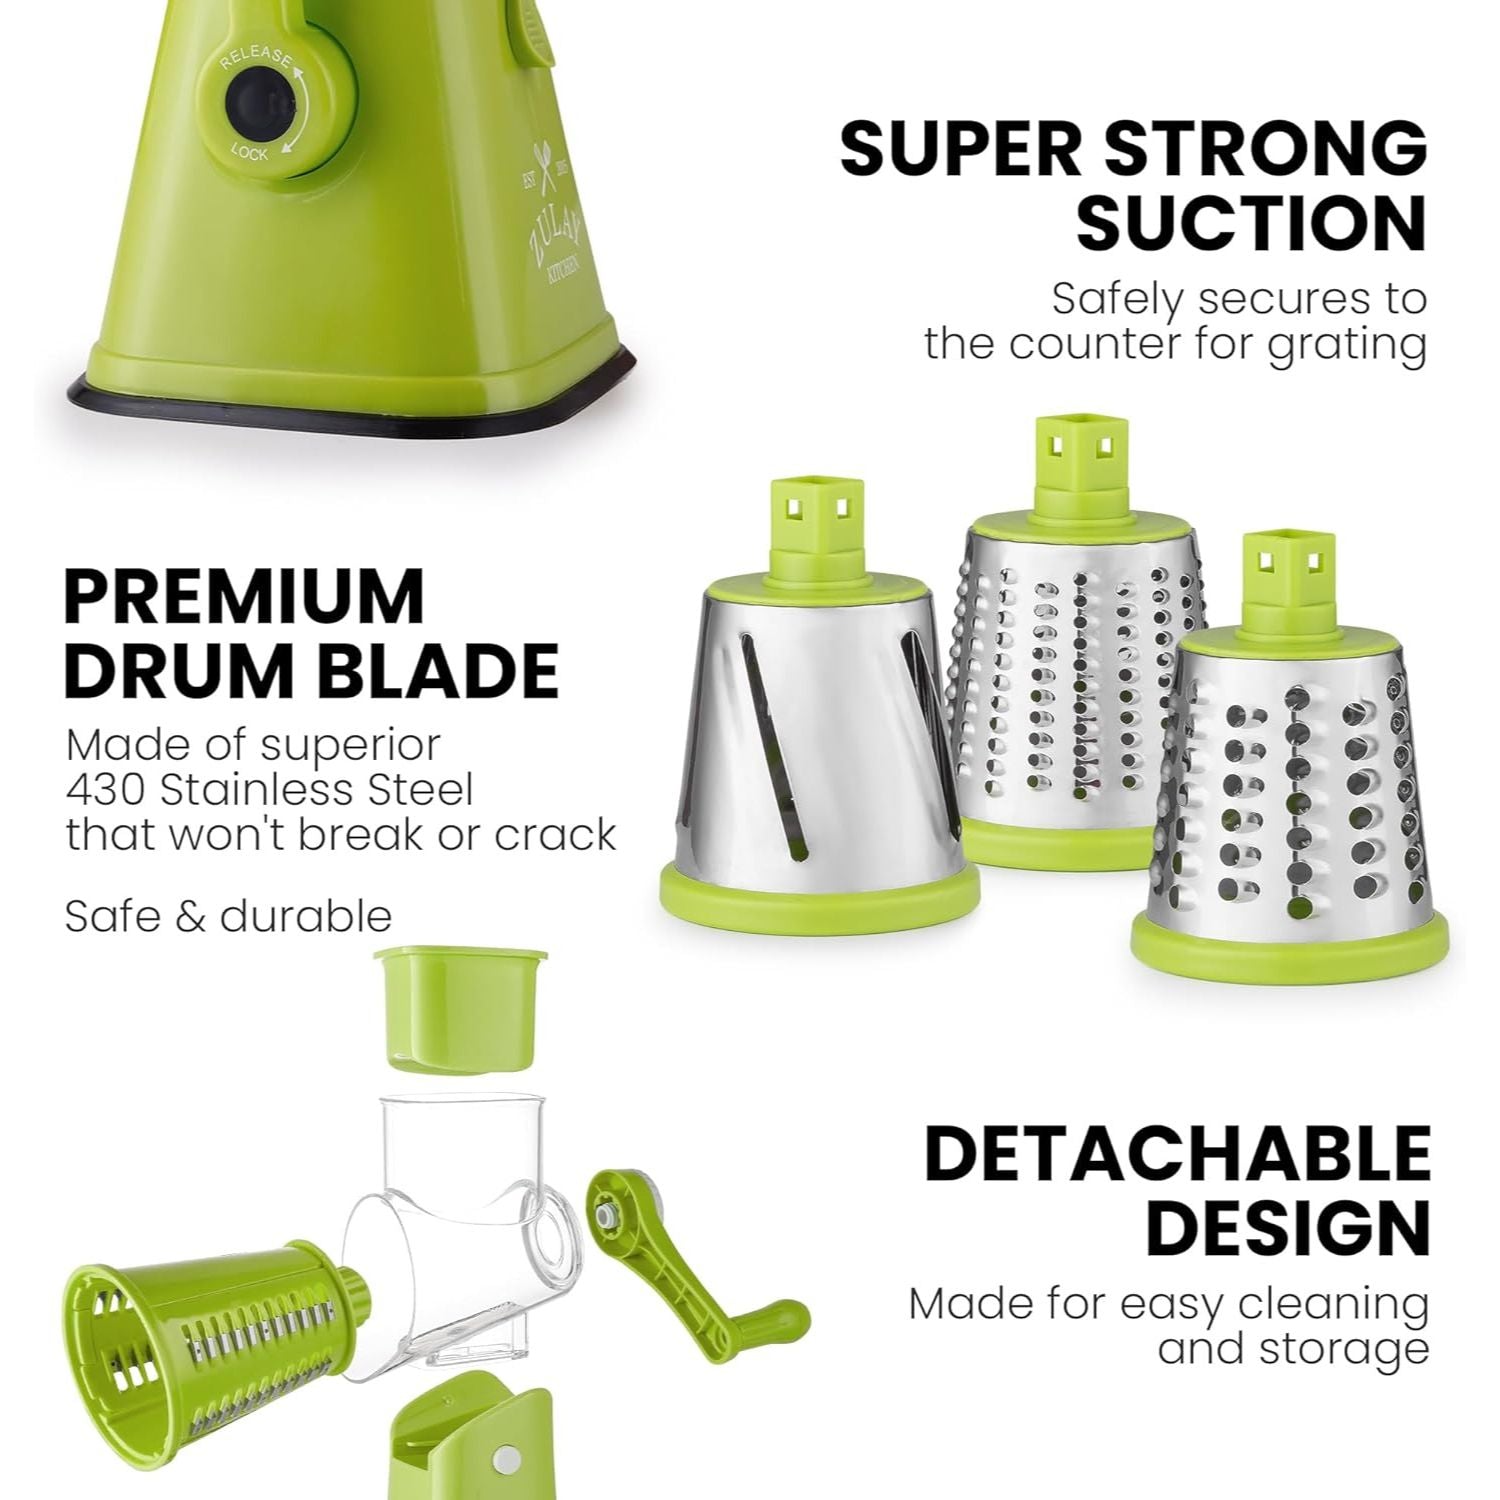 Zulay Kitchen Manual Rotary Cheese Grater with Handle - Light Green, 1 -  Foods Co.